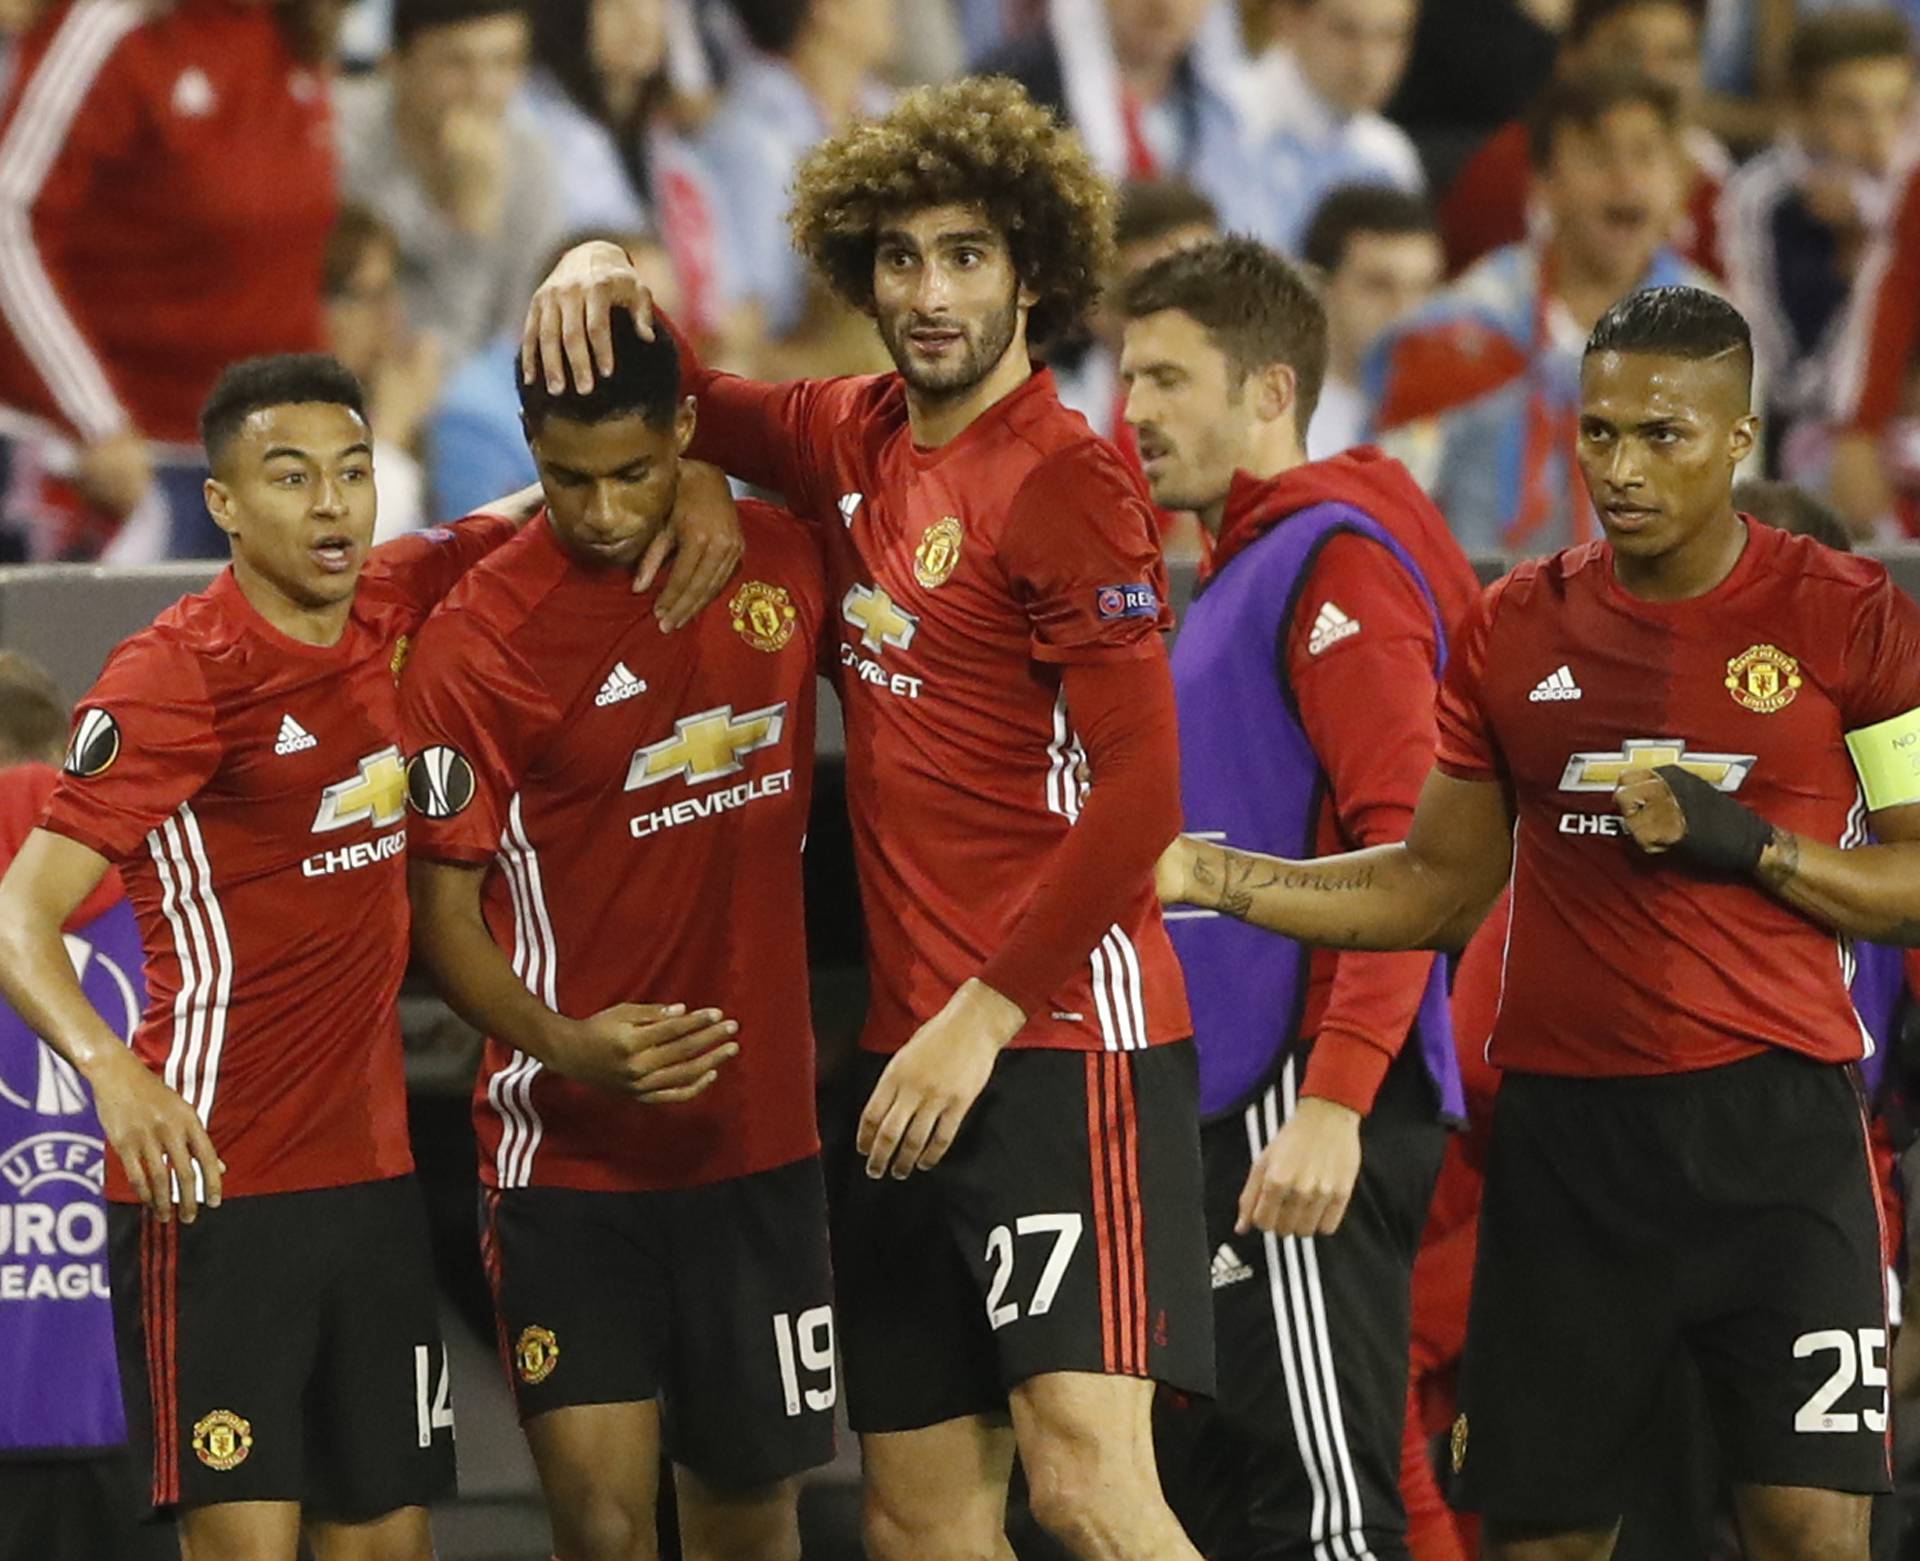 Manchester United's Marcus Rashford celebrates scoring their first goal with team mates